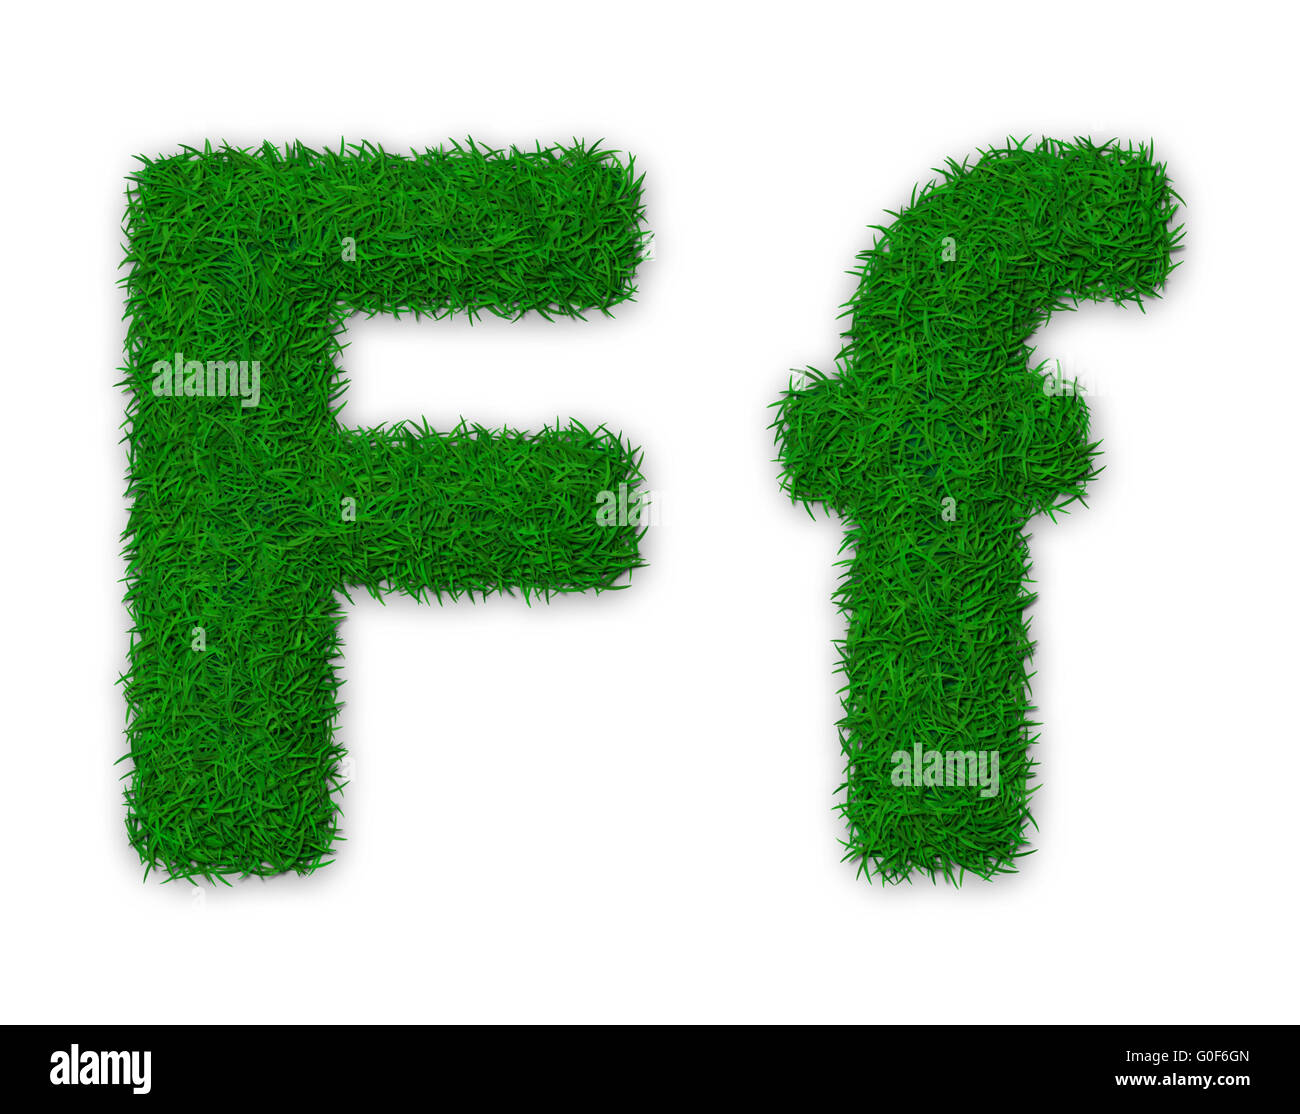 Illustration of capital and lowercase letter F made of grass Stock Photo